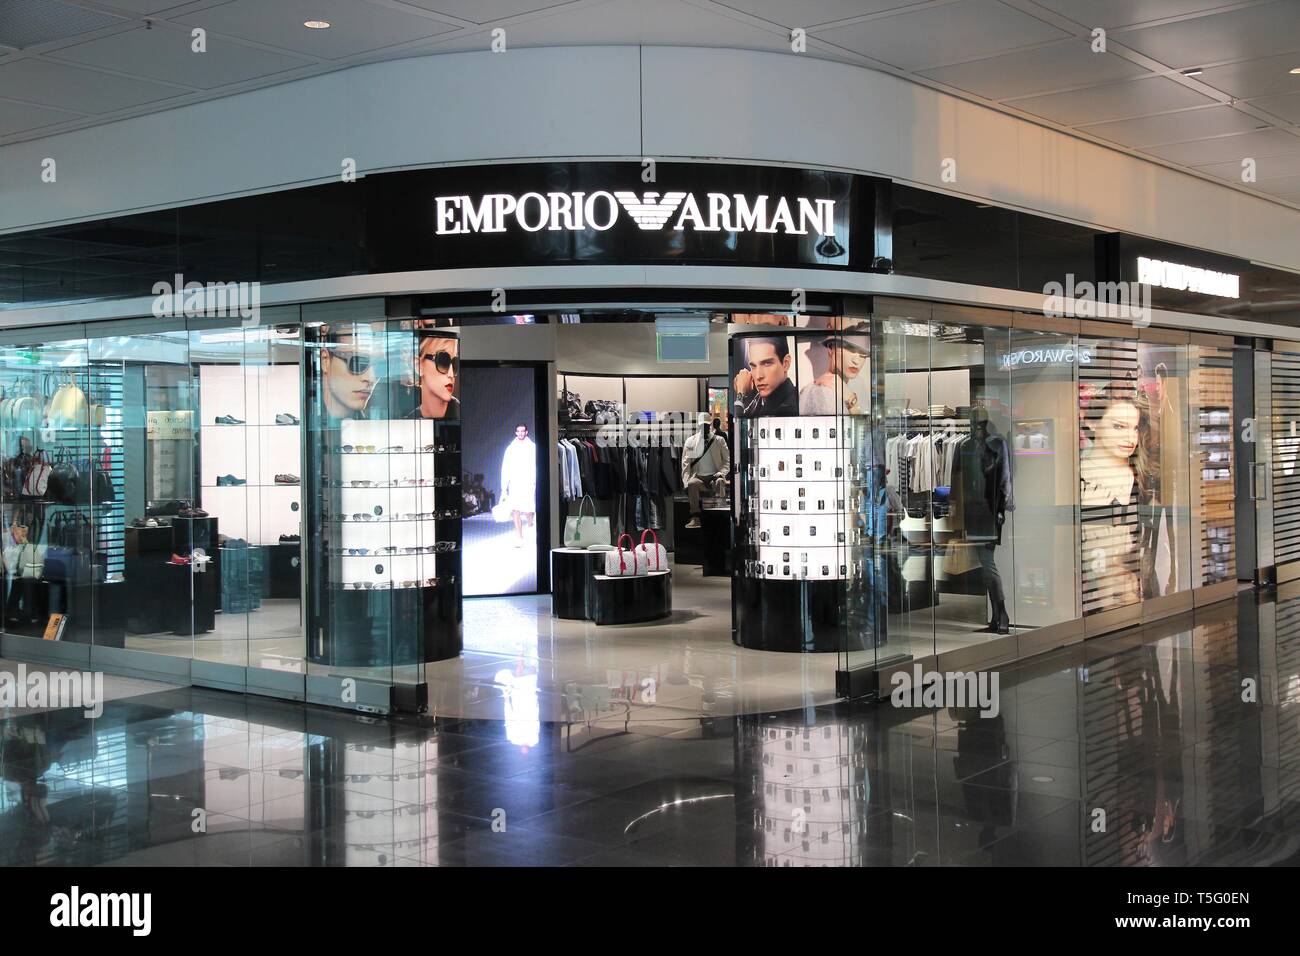 Emporio Armani Store High Resolution Stock Photography and Images - Alamy